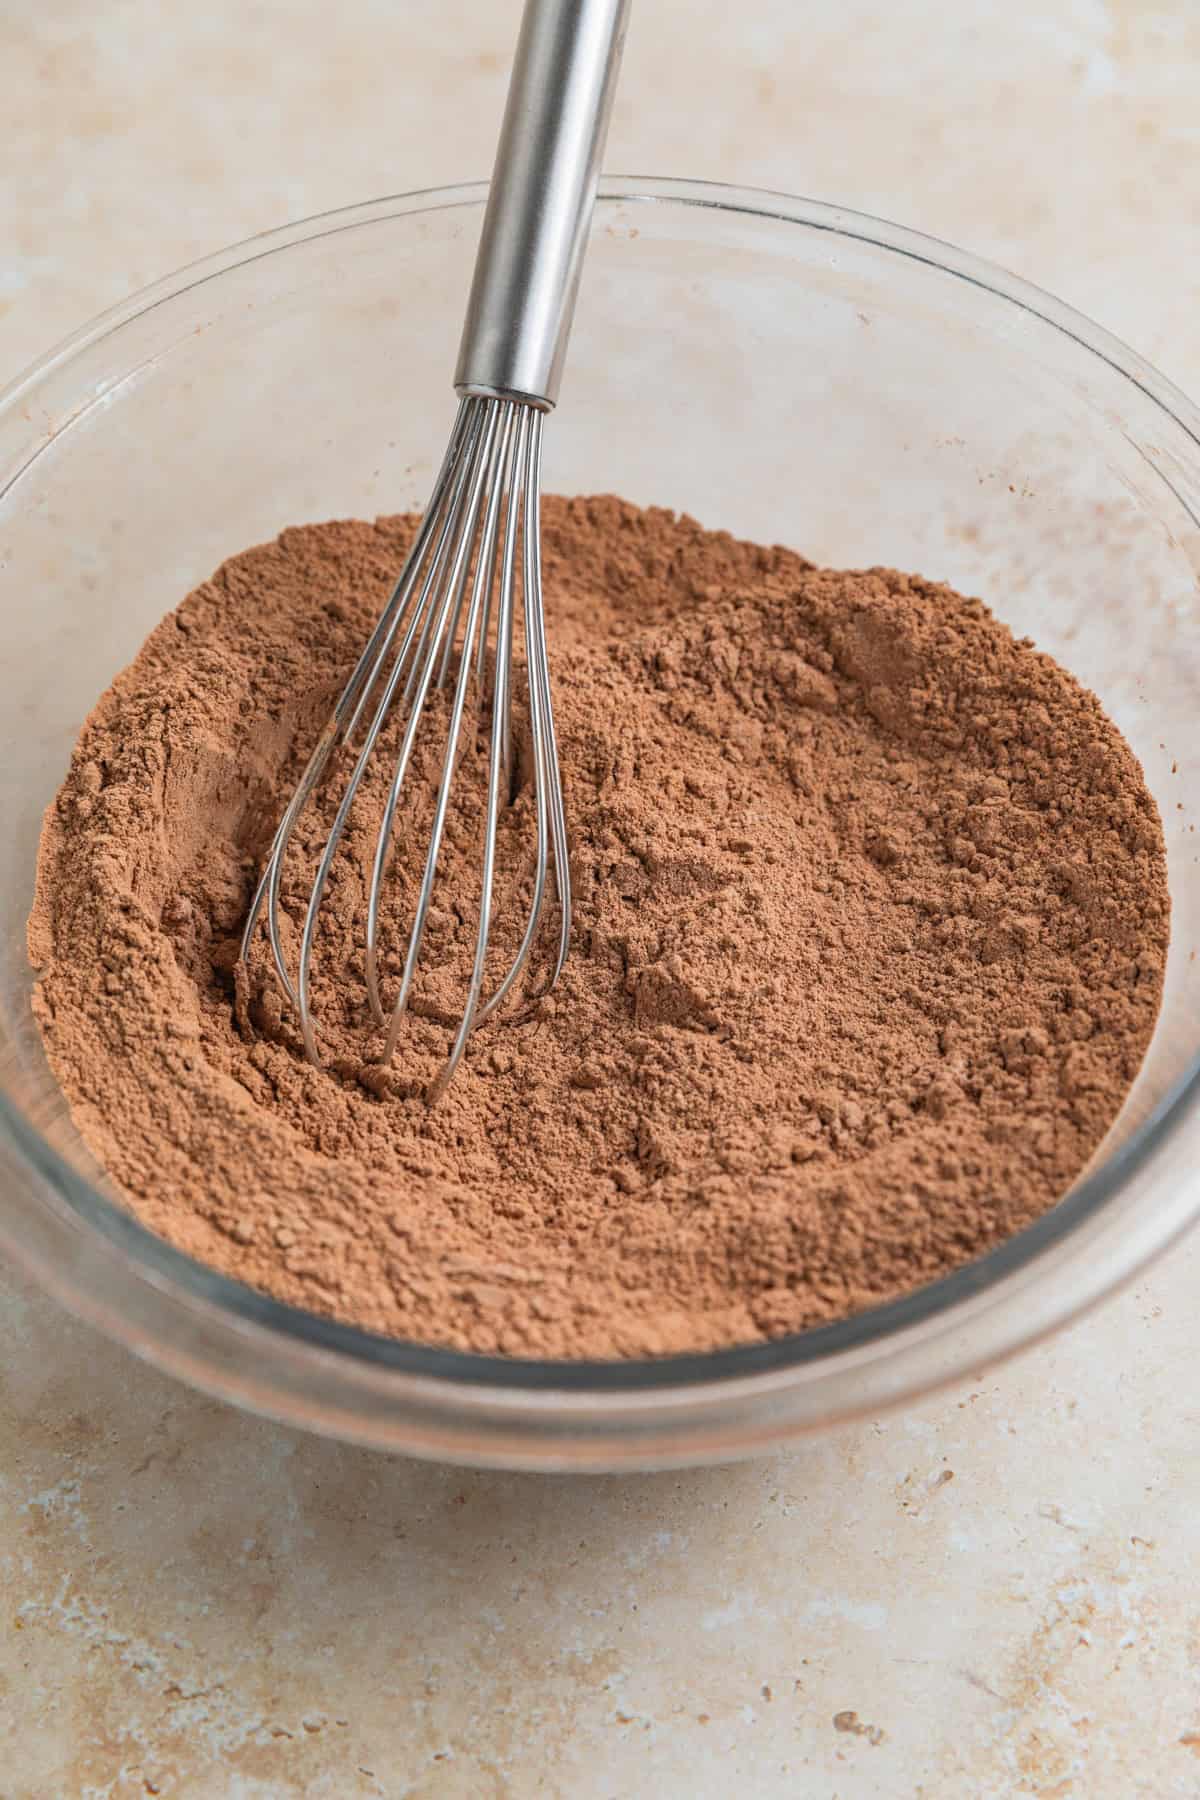 Cocoa powder, flour and other dry ingredients in mixing bowl.